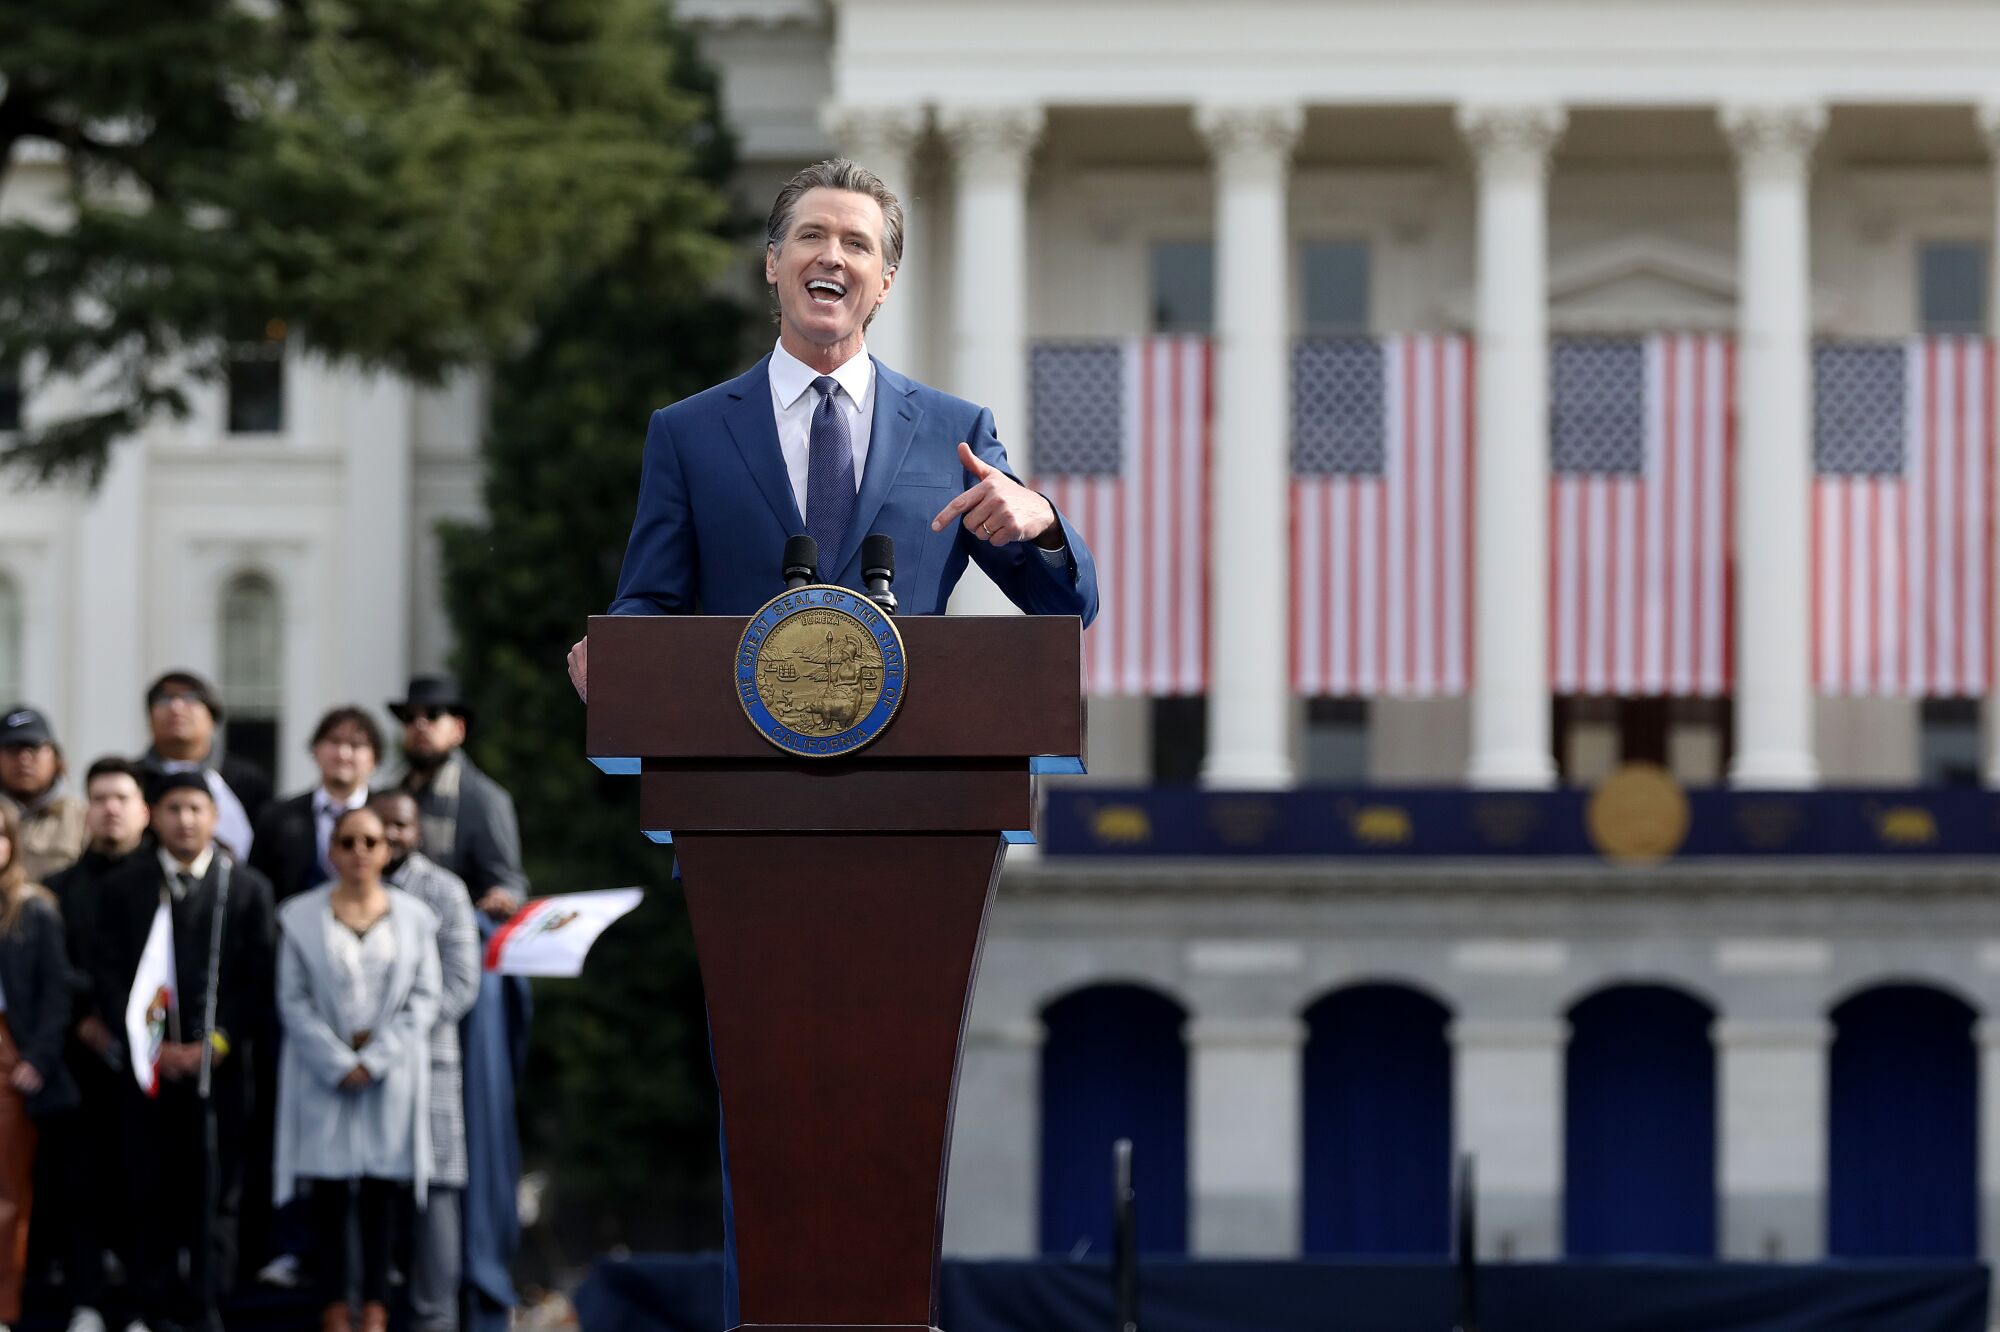 Governor Gavin Newsom smiles as he speaks from a pulpit.